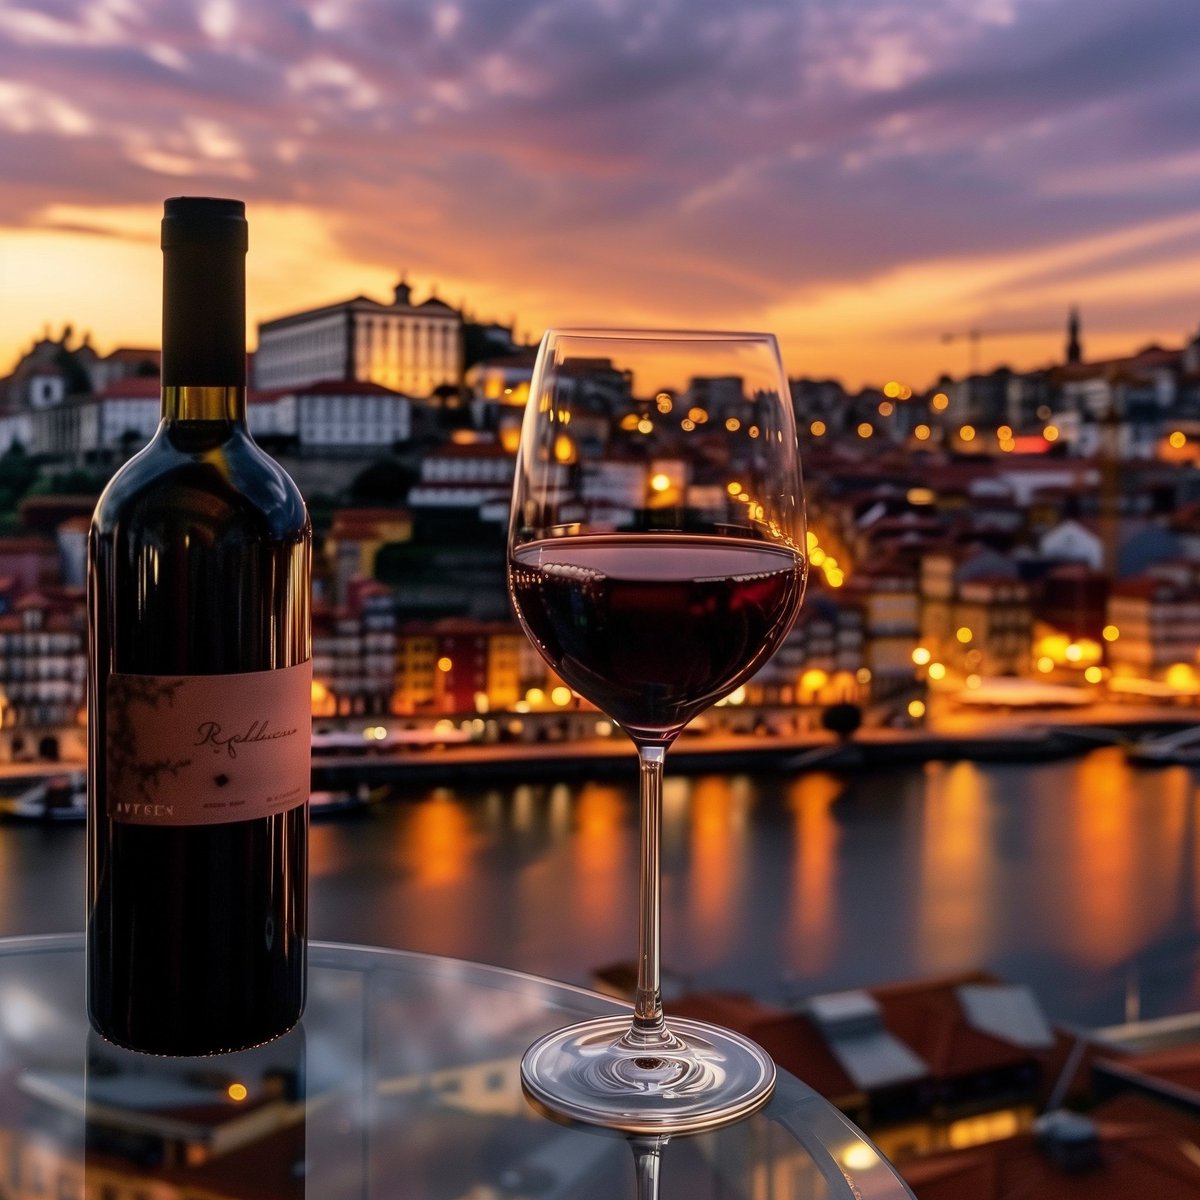 Do you know why Port wine is aged in Vila Nova de Gaia and not Douro Valley? 
#portwine #dourovalley #douro #winelovers